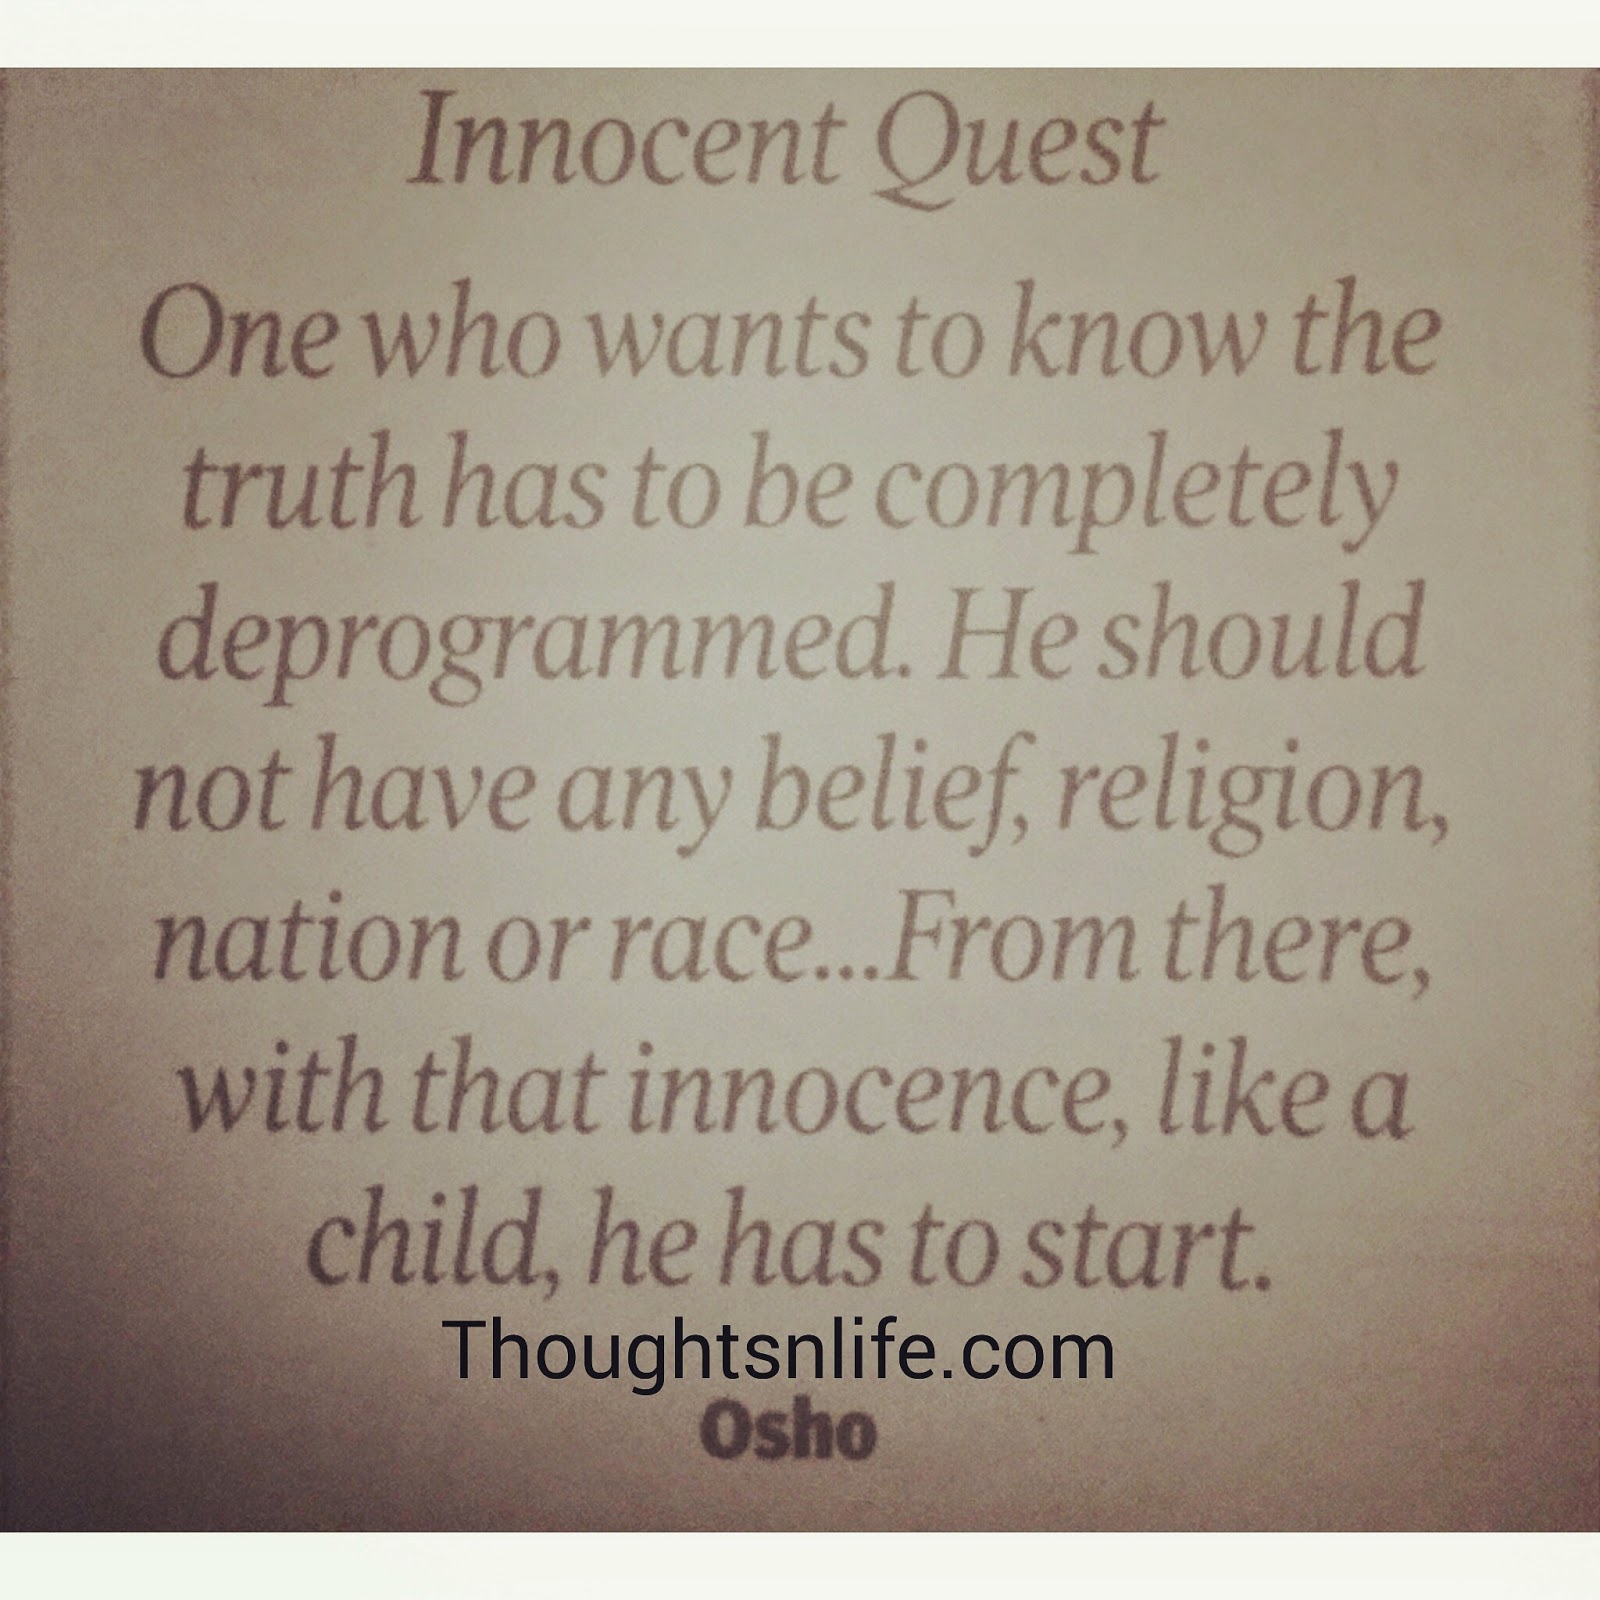 Thoughtsnlife.com: Innocent Quest- one who wants to know the truth has to be completely deprogrammed. He should not have any belief, religion, nation or race..From there, With that innocence, Like a child, he has to start. ~ OSho